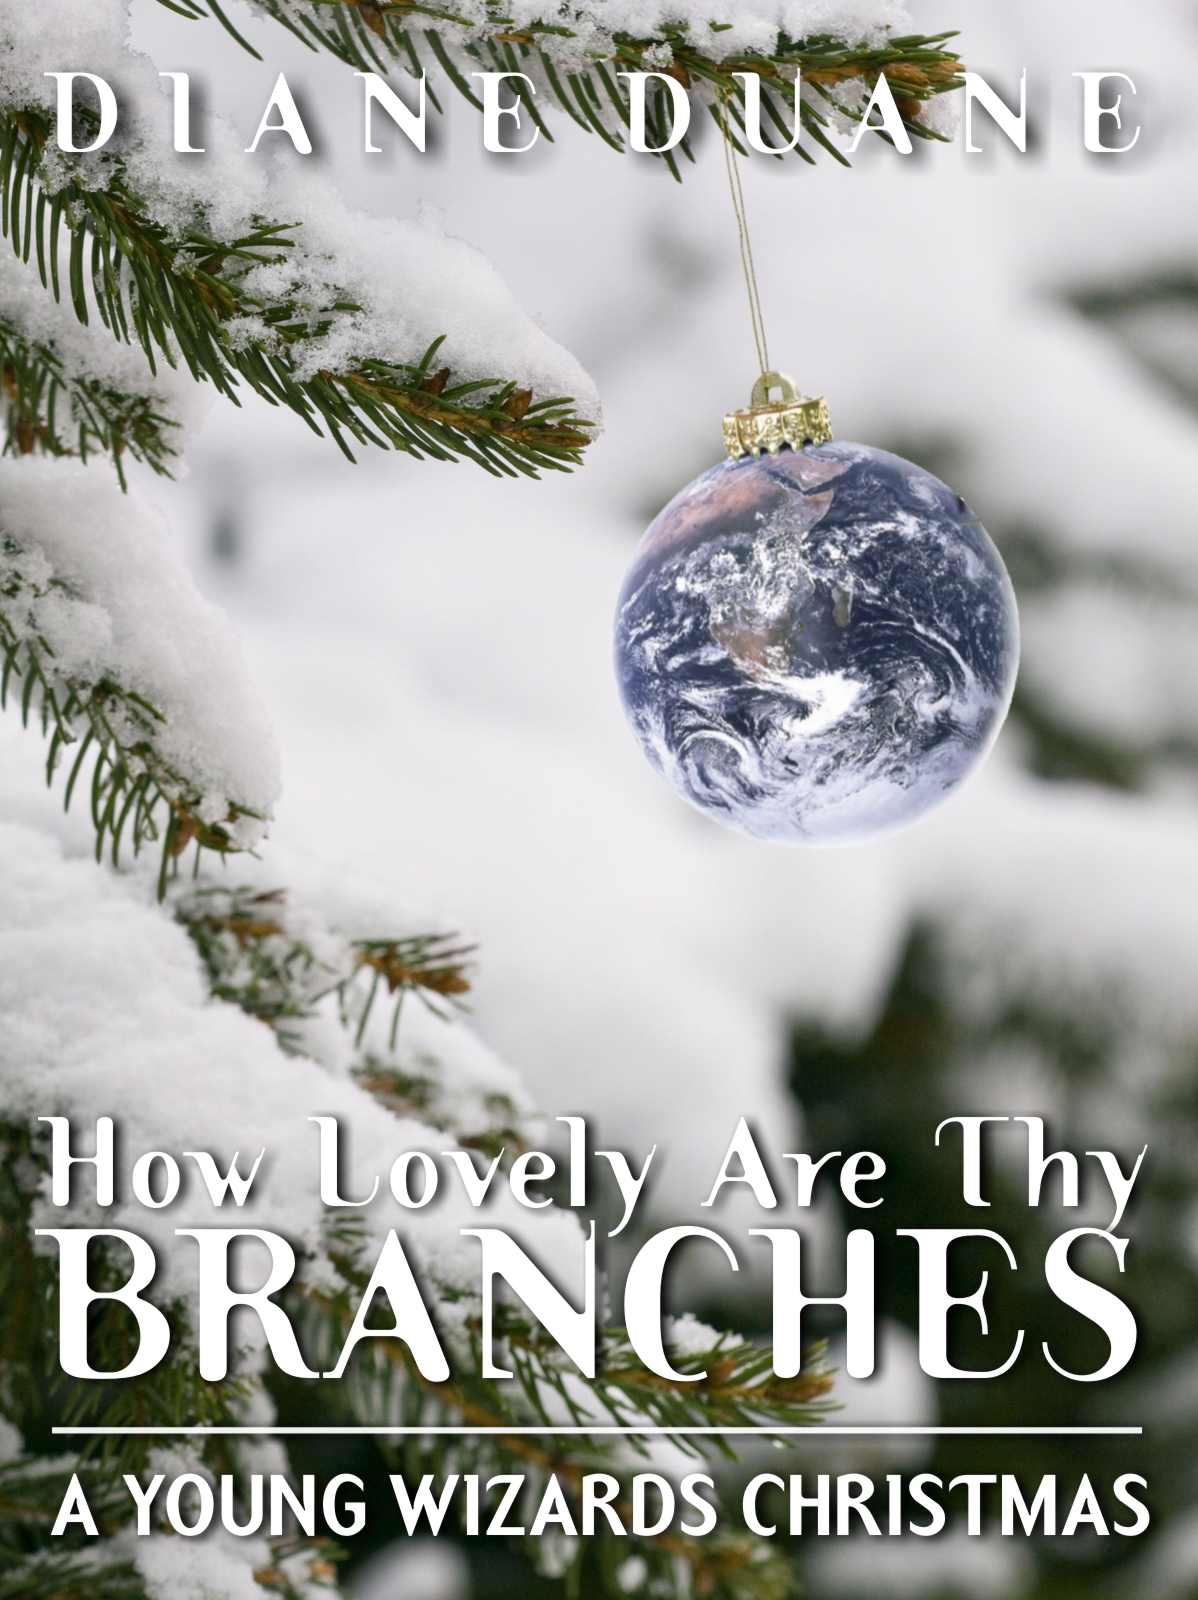 How Lovely Are Thy Branches: A Young Wizards Christmas by Diane Duane